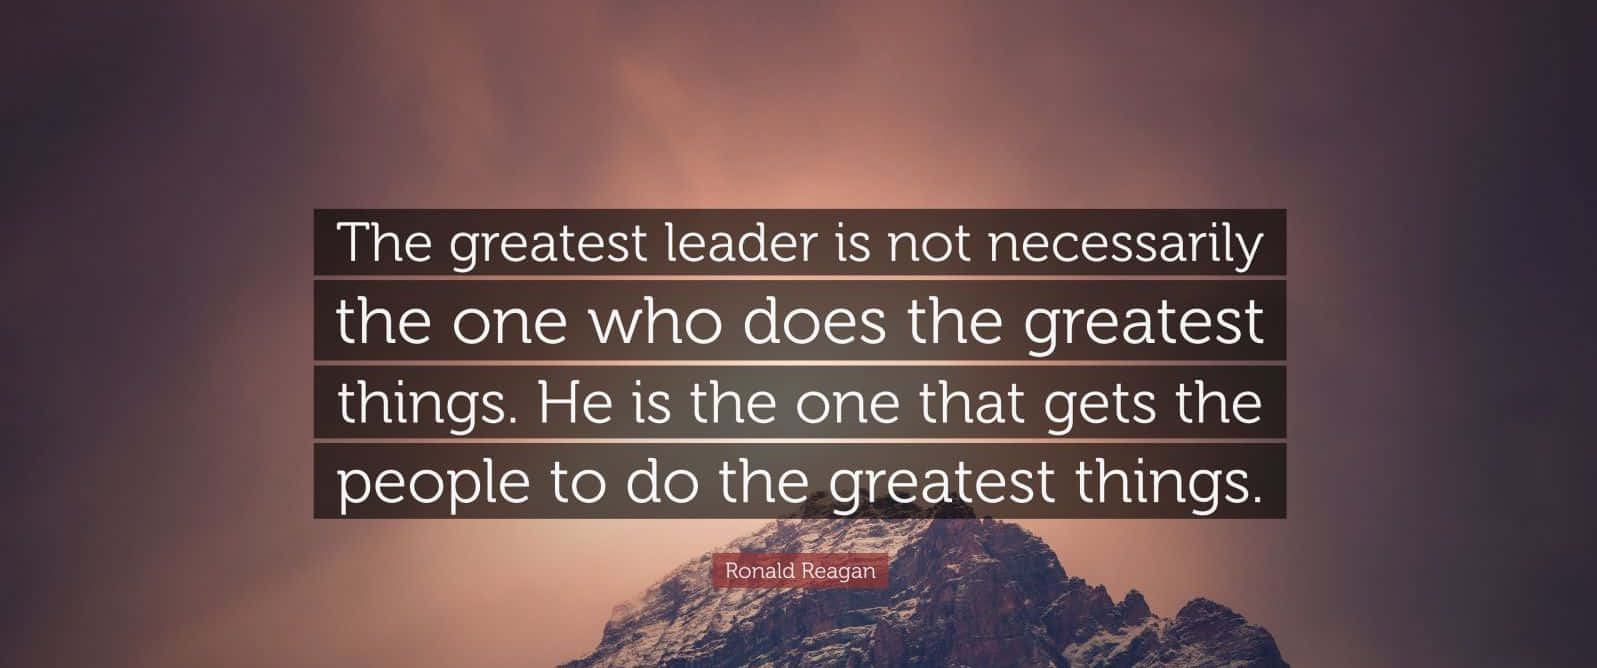 Greatest Leader Inspirational Quote Reagan Wallpaper